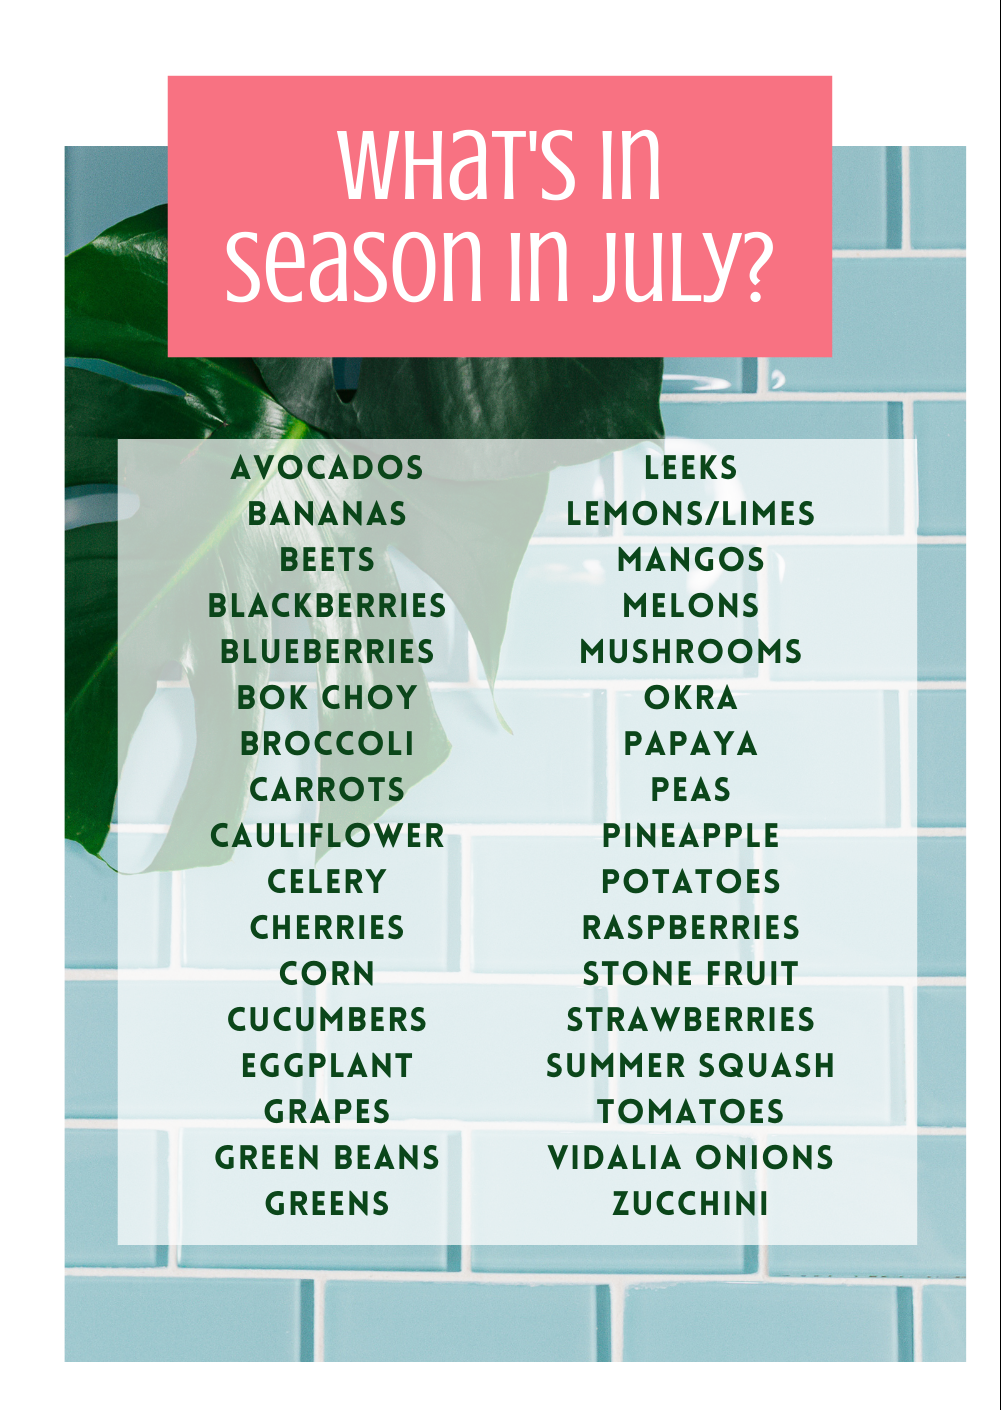 Fruits and Vegetables in Season for July